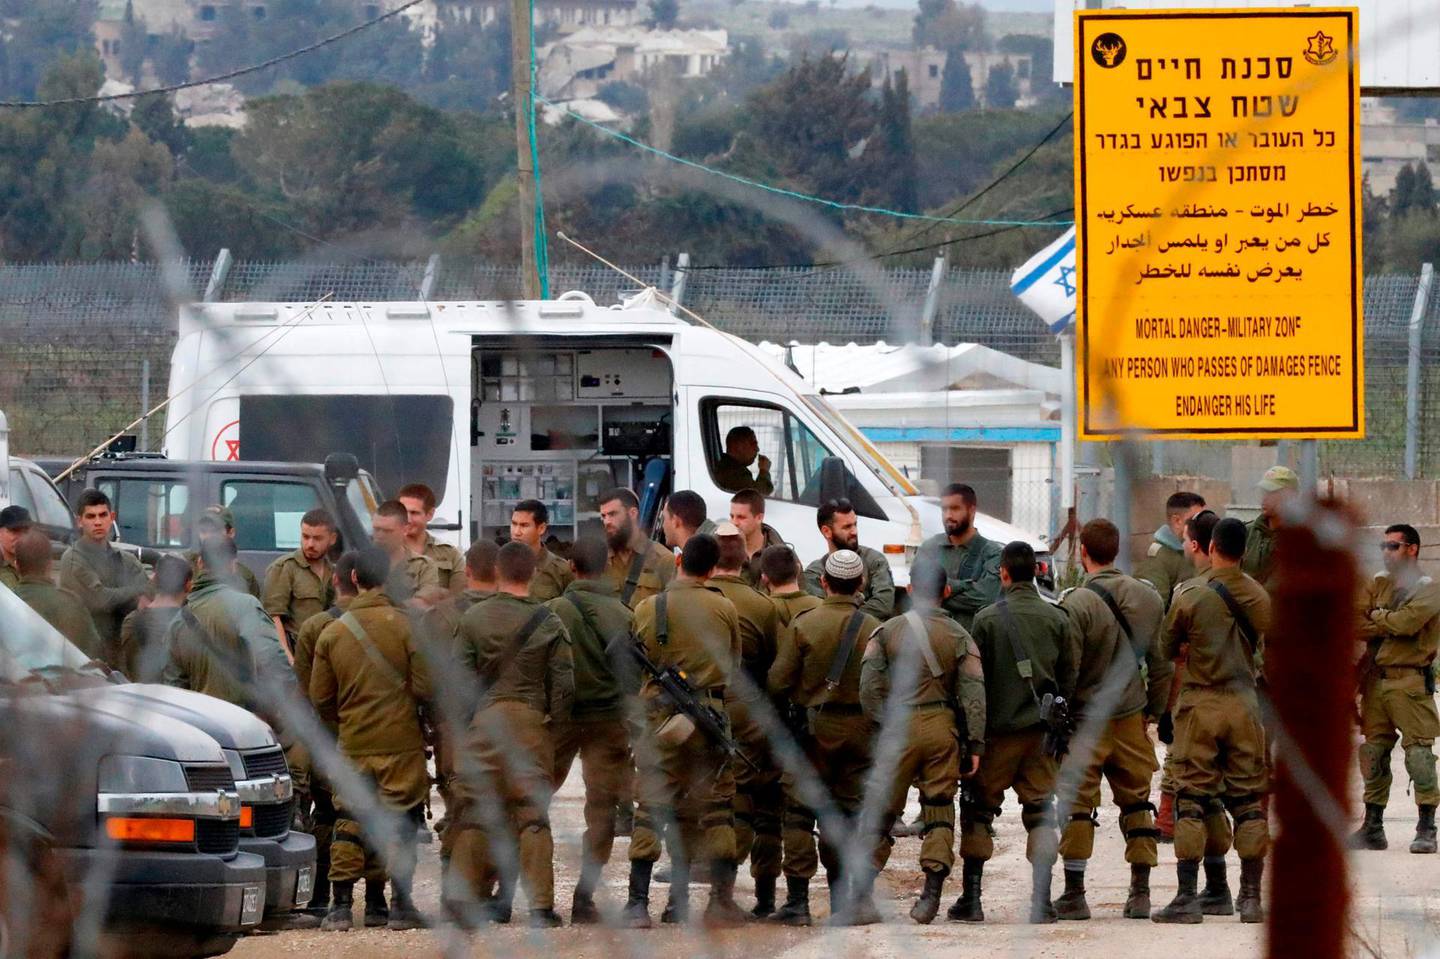 Israeli soldiers prepare at the Quneitra border crossing of the Israeli annexed-Golan Heights, on March 23, 2019, as demonstrations are expected on the Syrian side of the border to protest against the backing of Israel's capture of the Golan Heights by the US president. US President Donald Trump is again breaking diplomatic norms in backing Israel's capture of the Golan Heights. Israel conquered the Golan from Syria in the Six-Day War of 1967 and annexed it in 1981, but until now, the international community has not accepted the move, hoping the territory could serve as a bargaining chip in a future peace deal between the countries. But Trump on March 21 turned to Twitter for the abrupt diplomatic turnaround, saying that after 52 years, "it is time for the United States to fully recognize" Israeli sovereignty. / AFP / Jack GUEZ 
